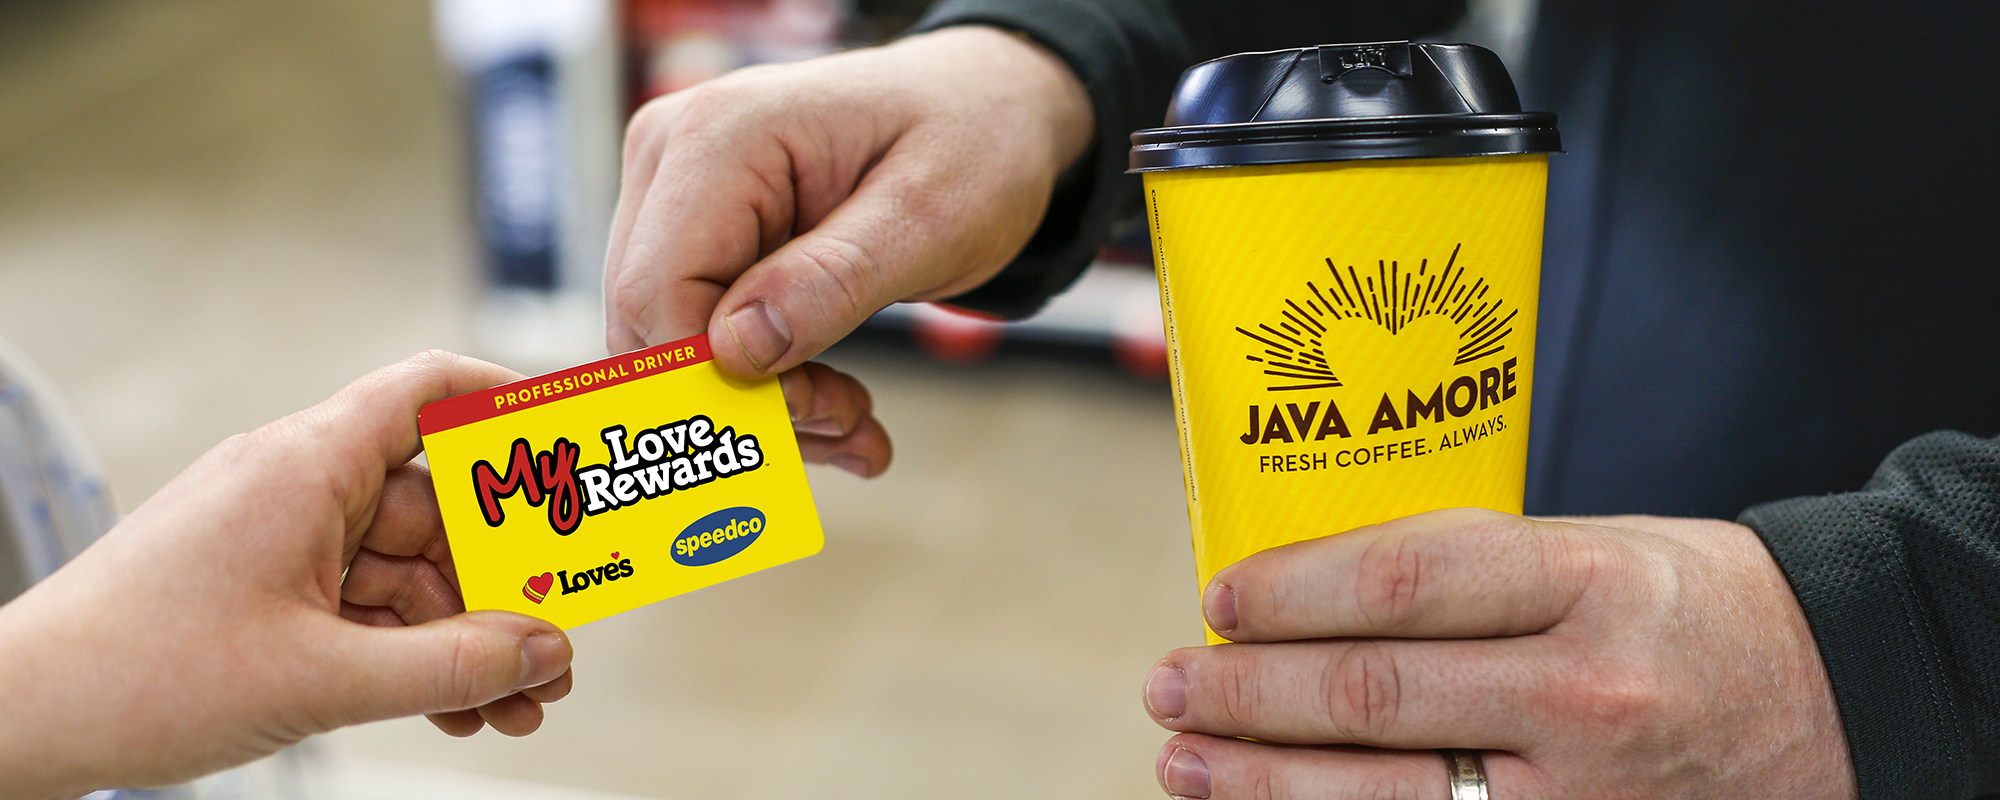 MLR card being handed from a customer to a cashier with a Love's Coffee cup